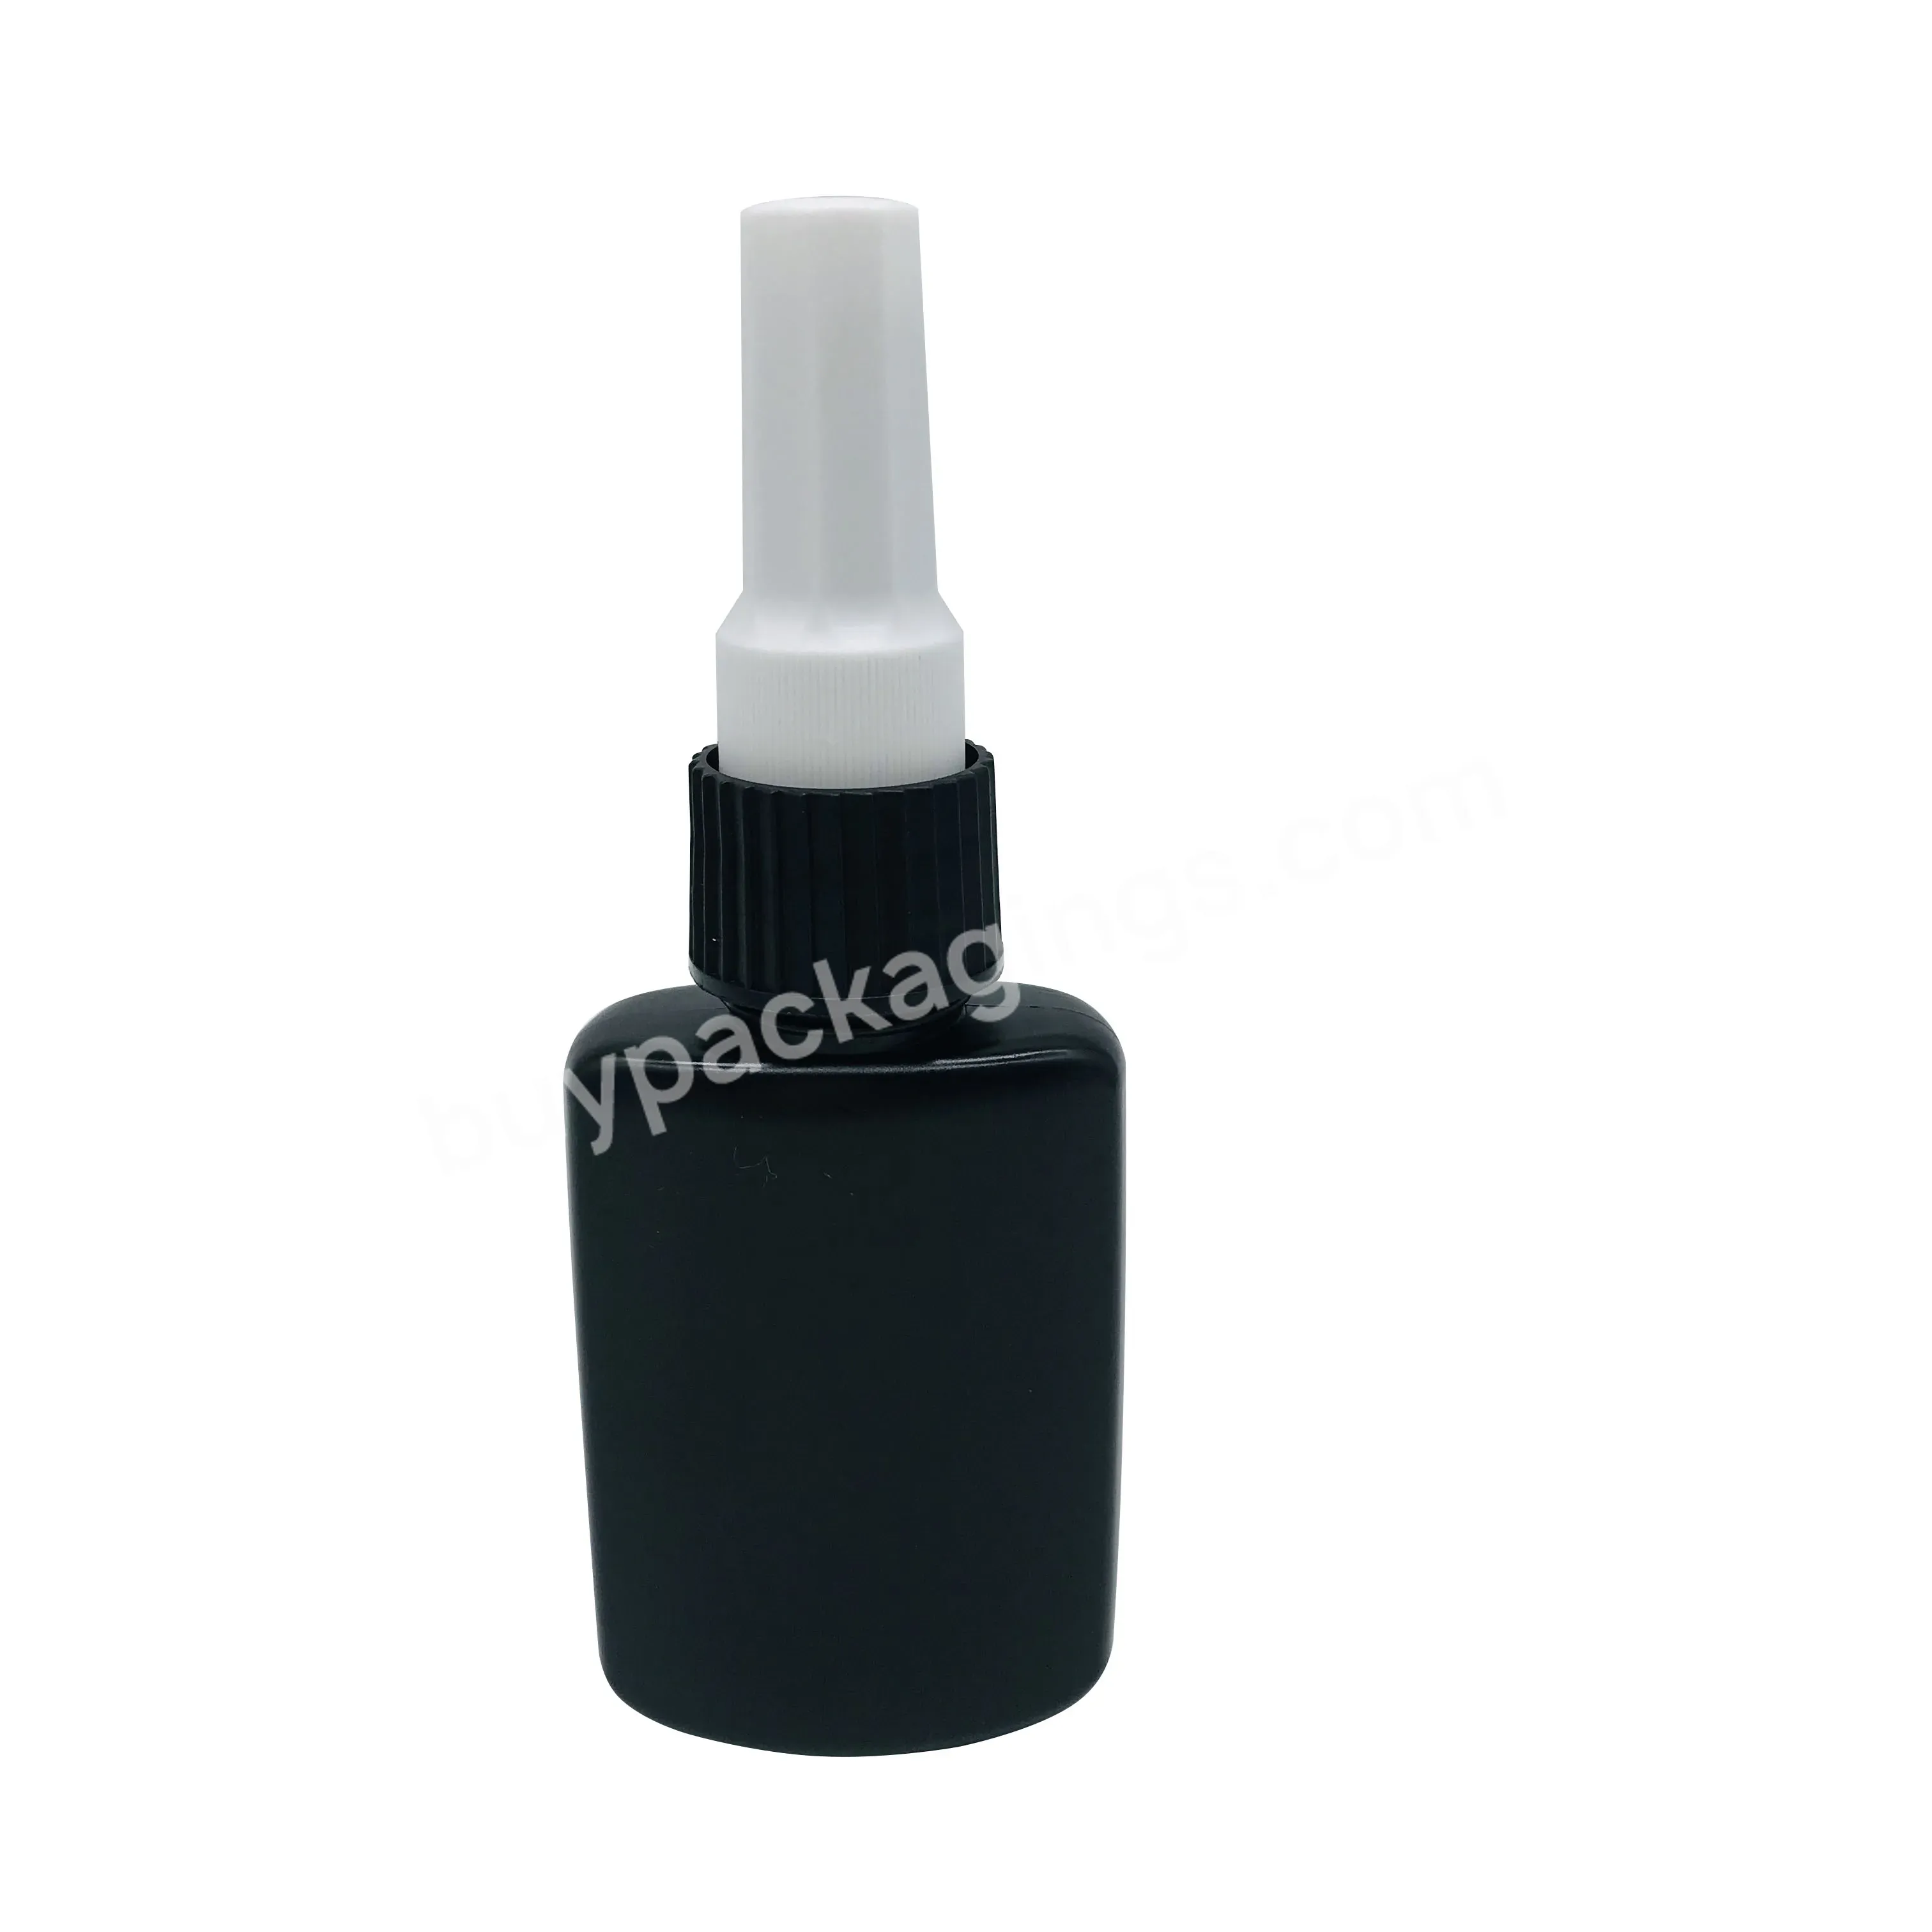 Wholesale 75g Empty Squeeze Adhesive Bottle Black Plastic Pe Bottle With Pointed Mouth Cap For Glue - Buy Pe Glue Bottle,Plastic Bottle For Glue,Plastic Squeeze Bottle.